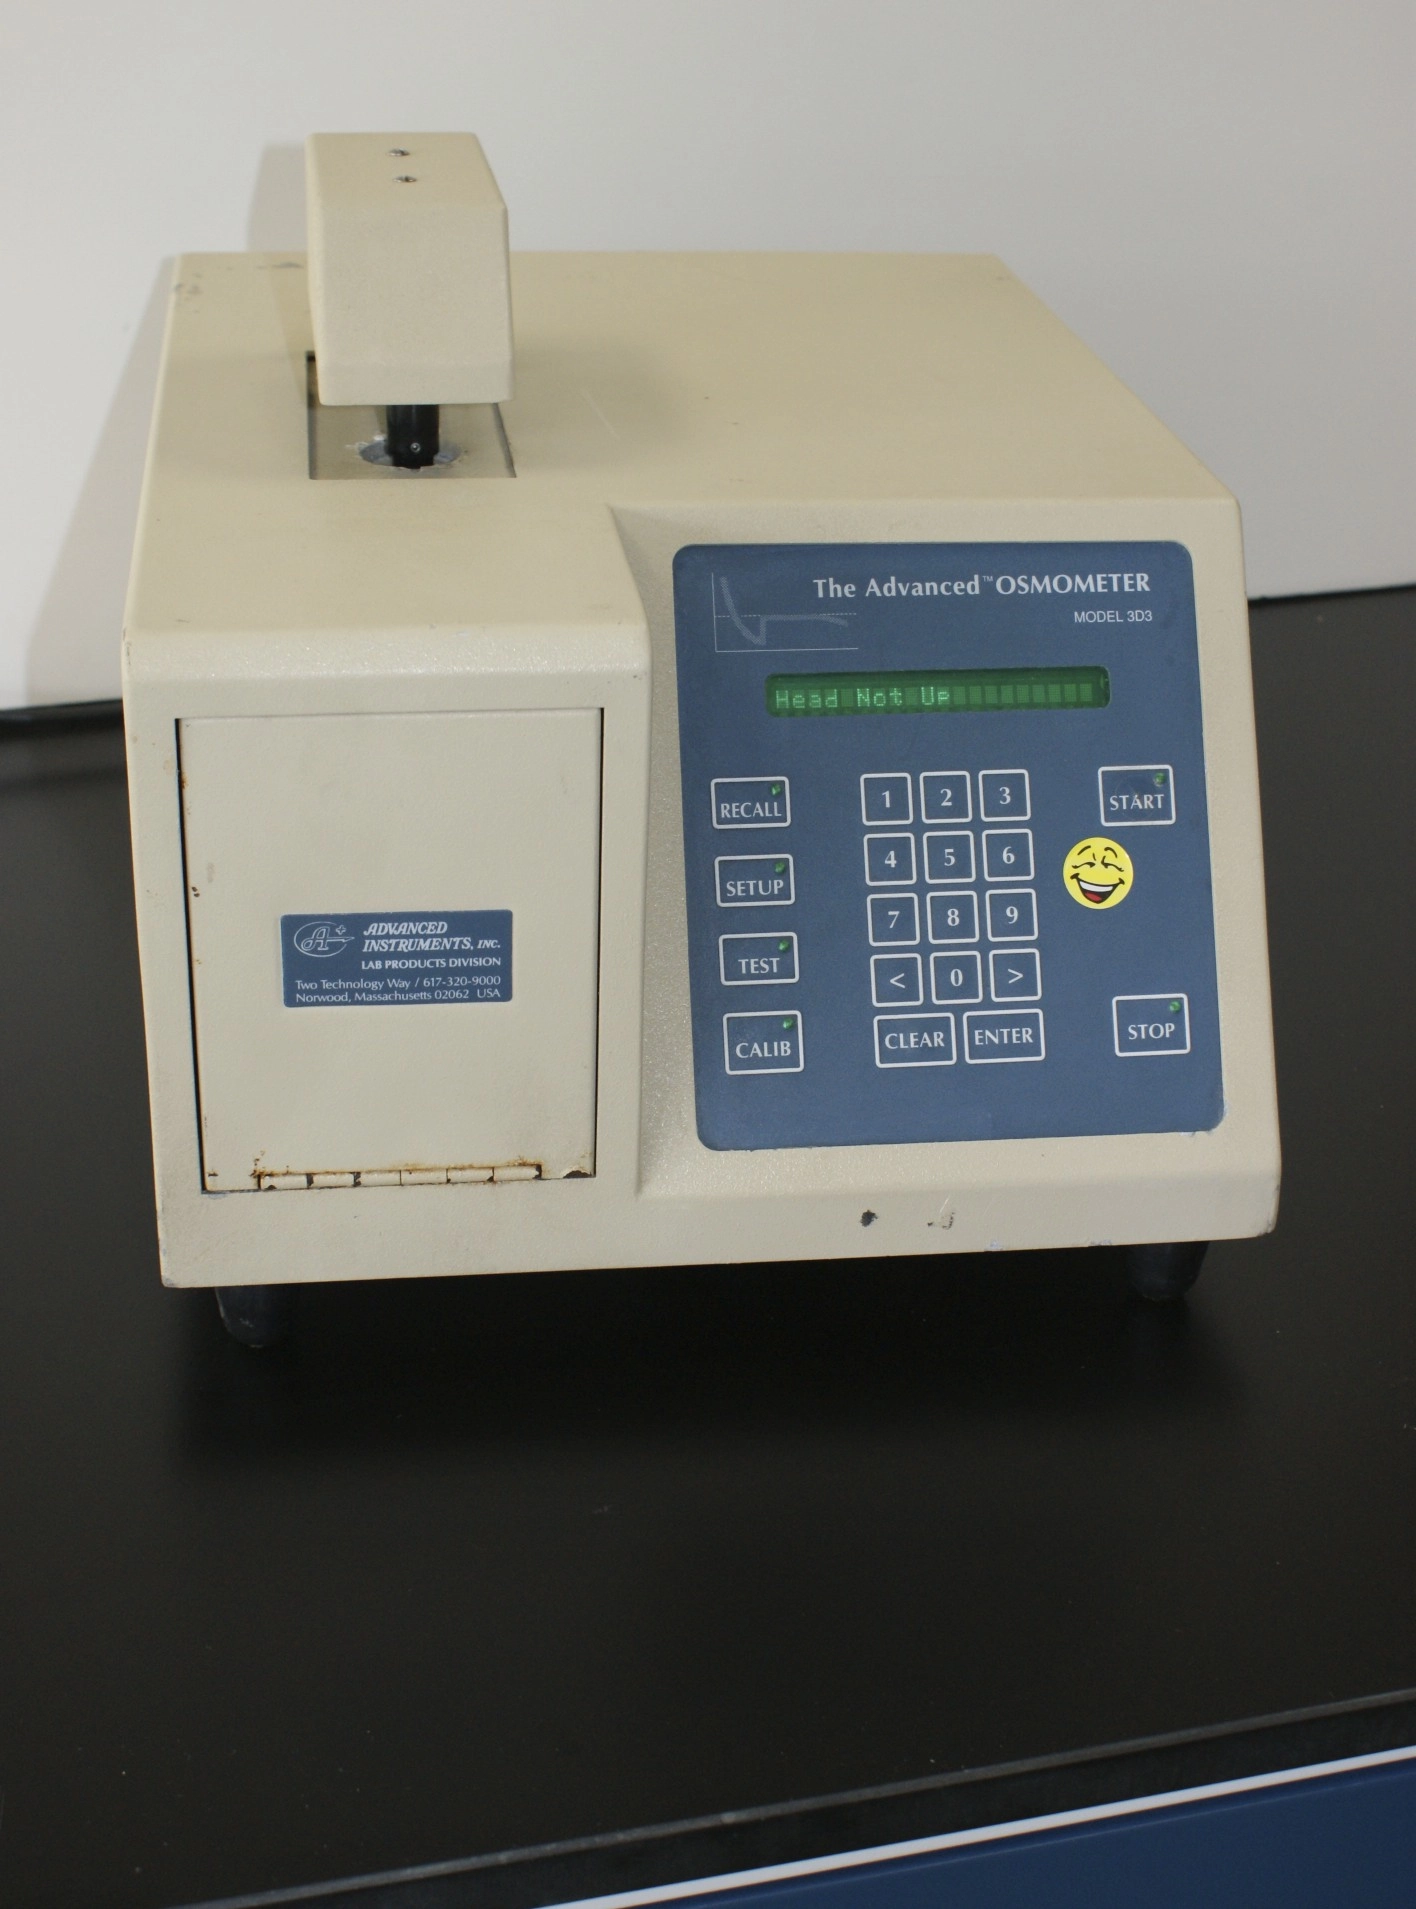 Advanced Model 3D3 Single-Sample Osmometer determines the osmolality of solutions using freezing point depression (FPD) used